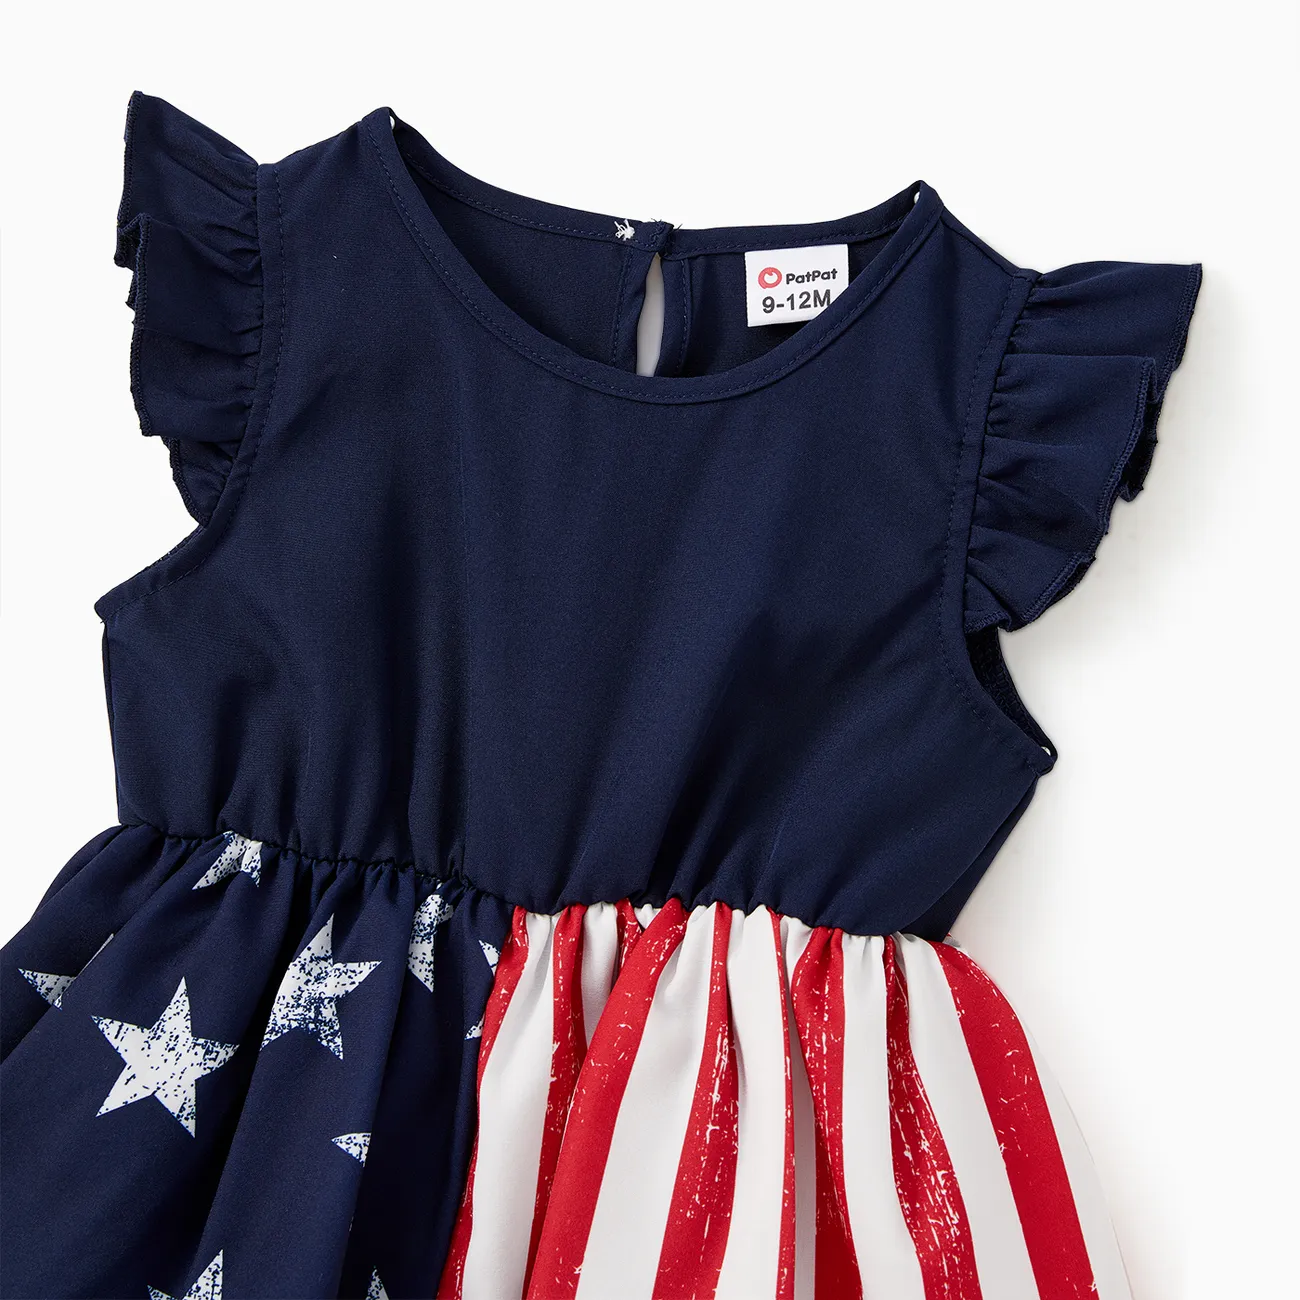 Independence Day Family Matching American Flag Print Shirt and High Neck Halter Sleeveless Belted Midi Dress Sets Color block big image 1